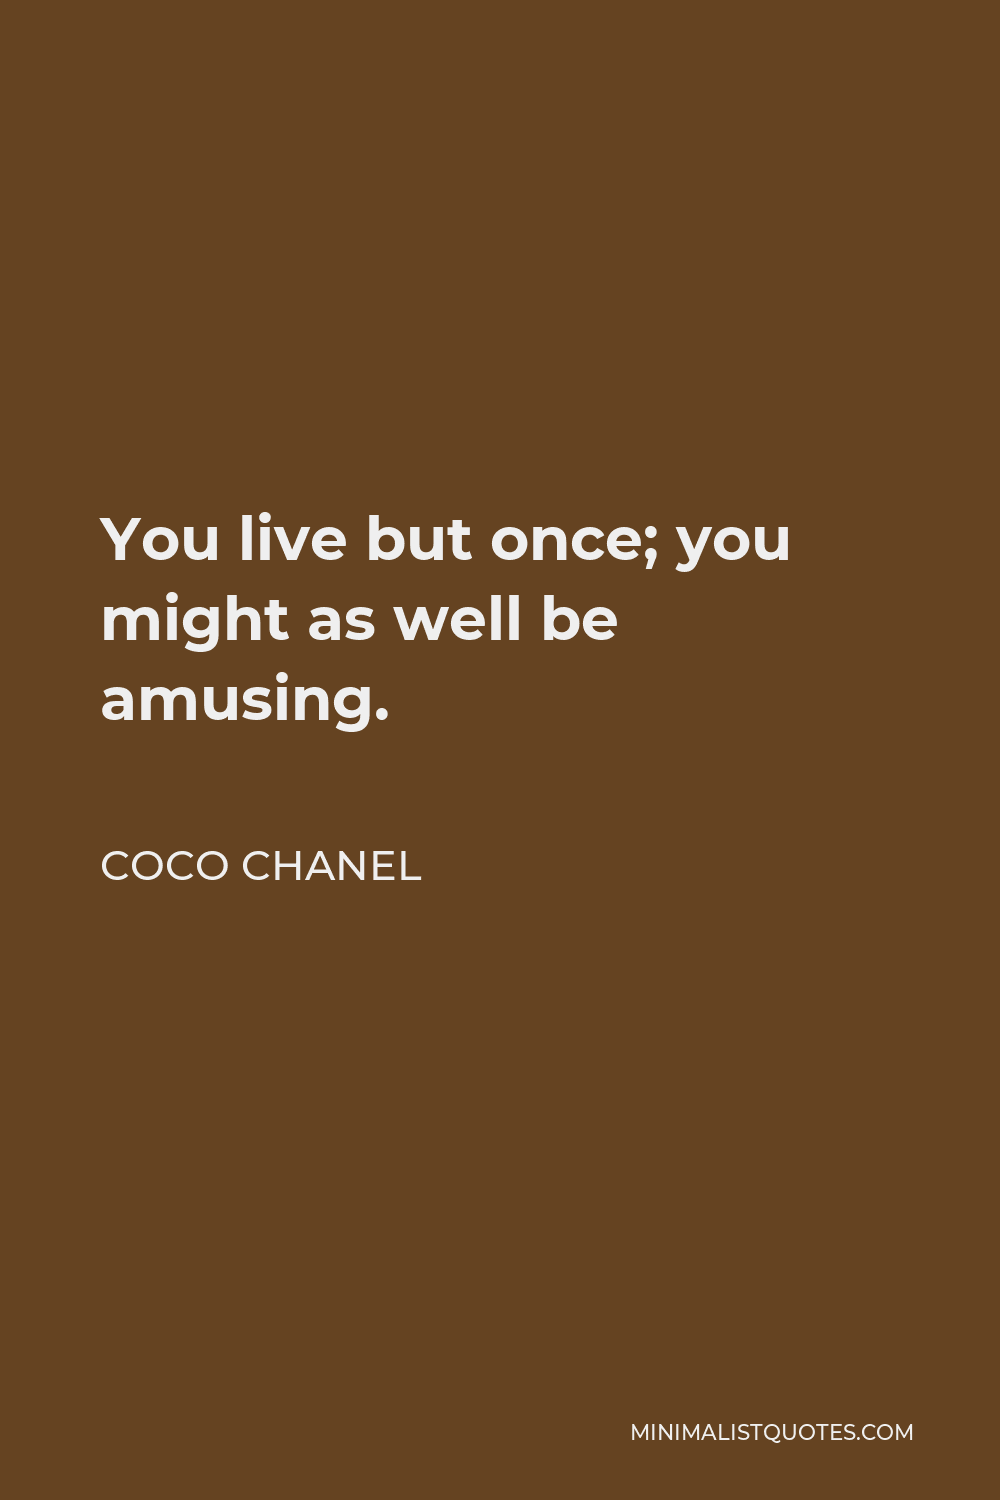 Coco Chanel Quote - You live but once; you might as well be amusing.